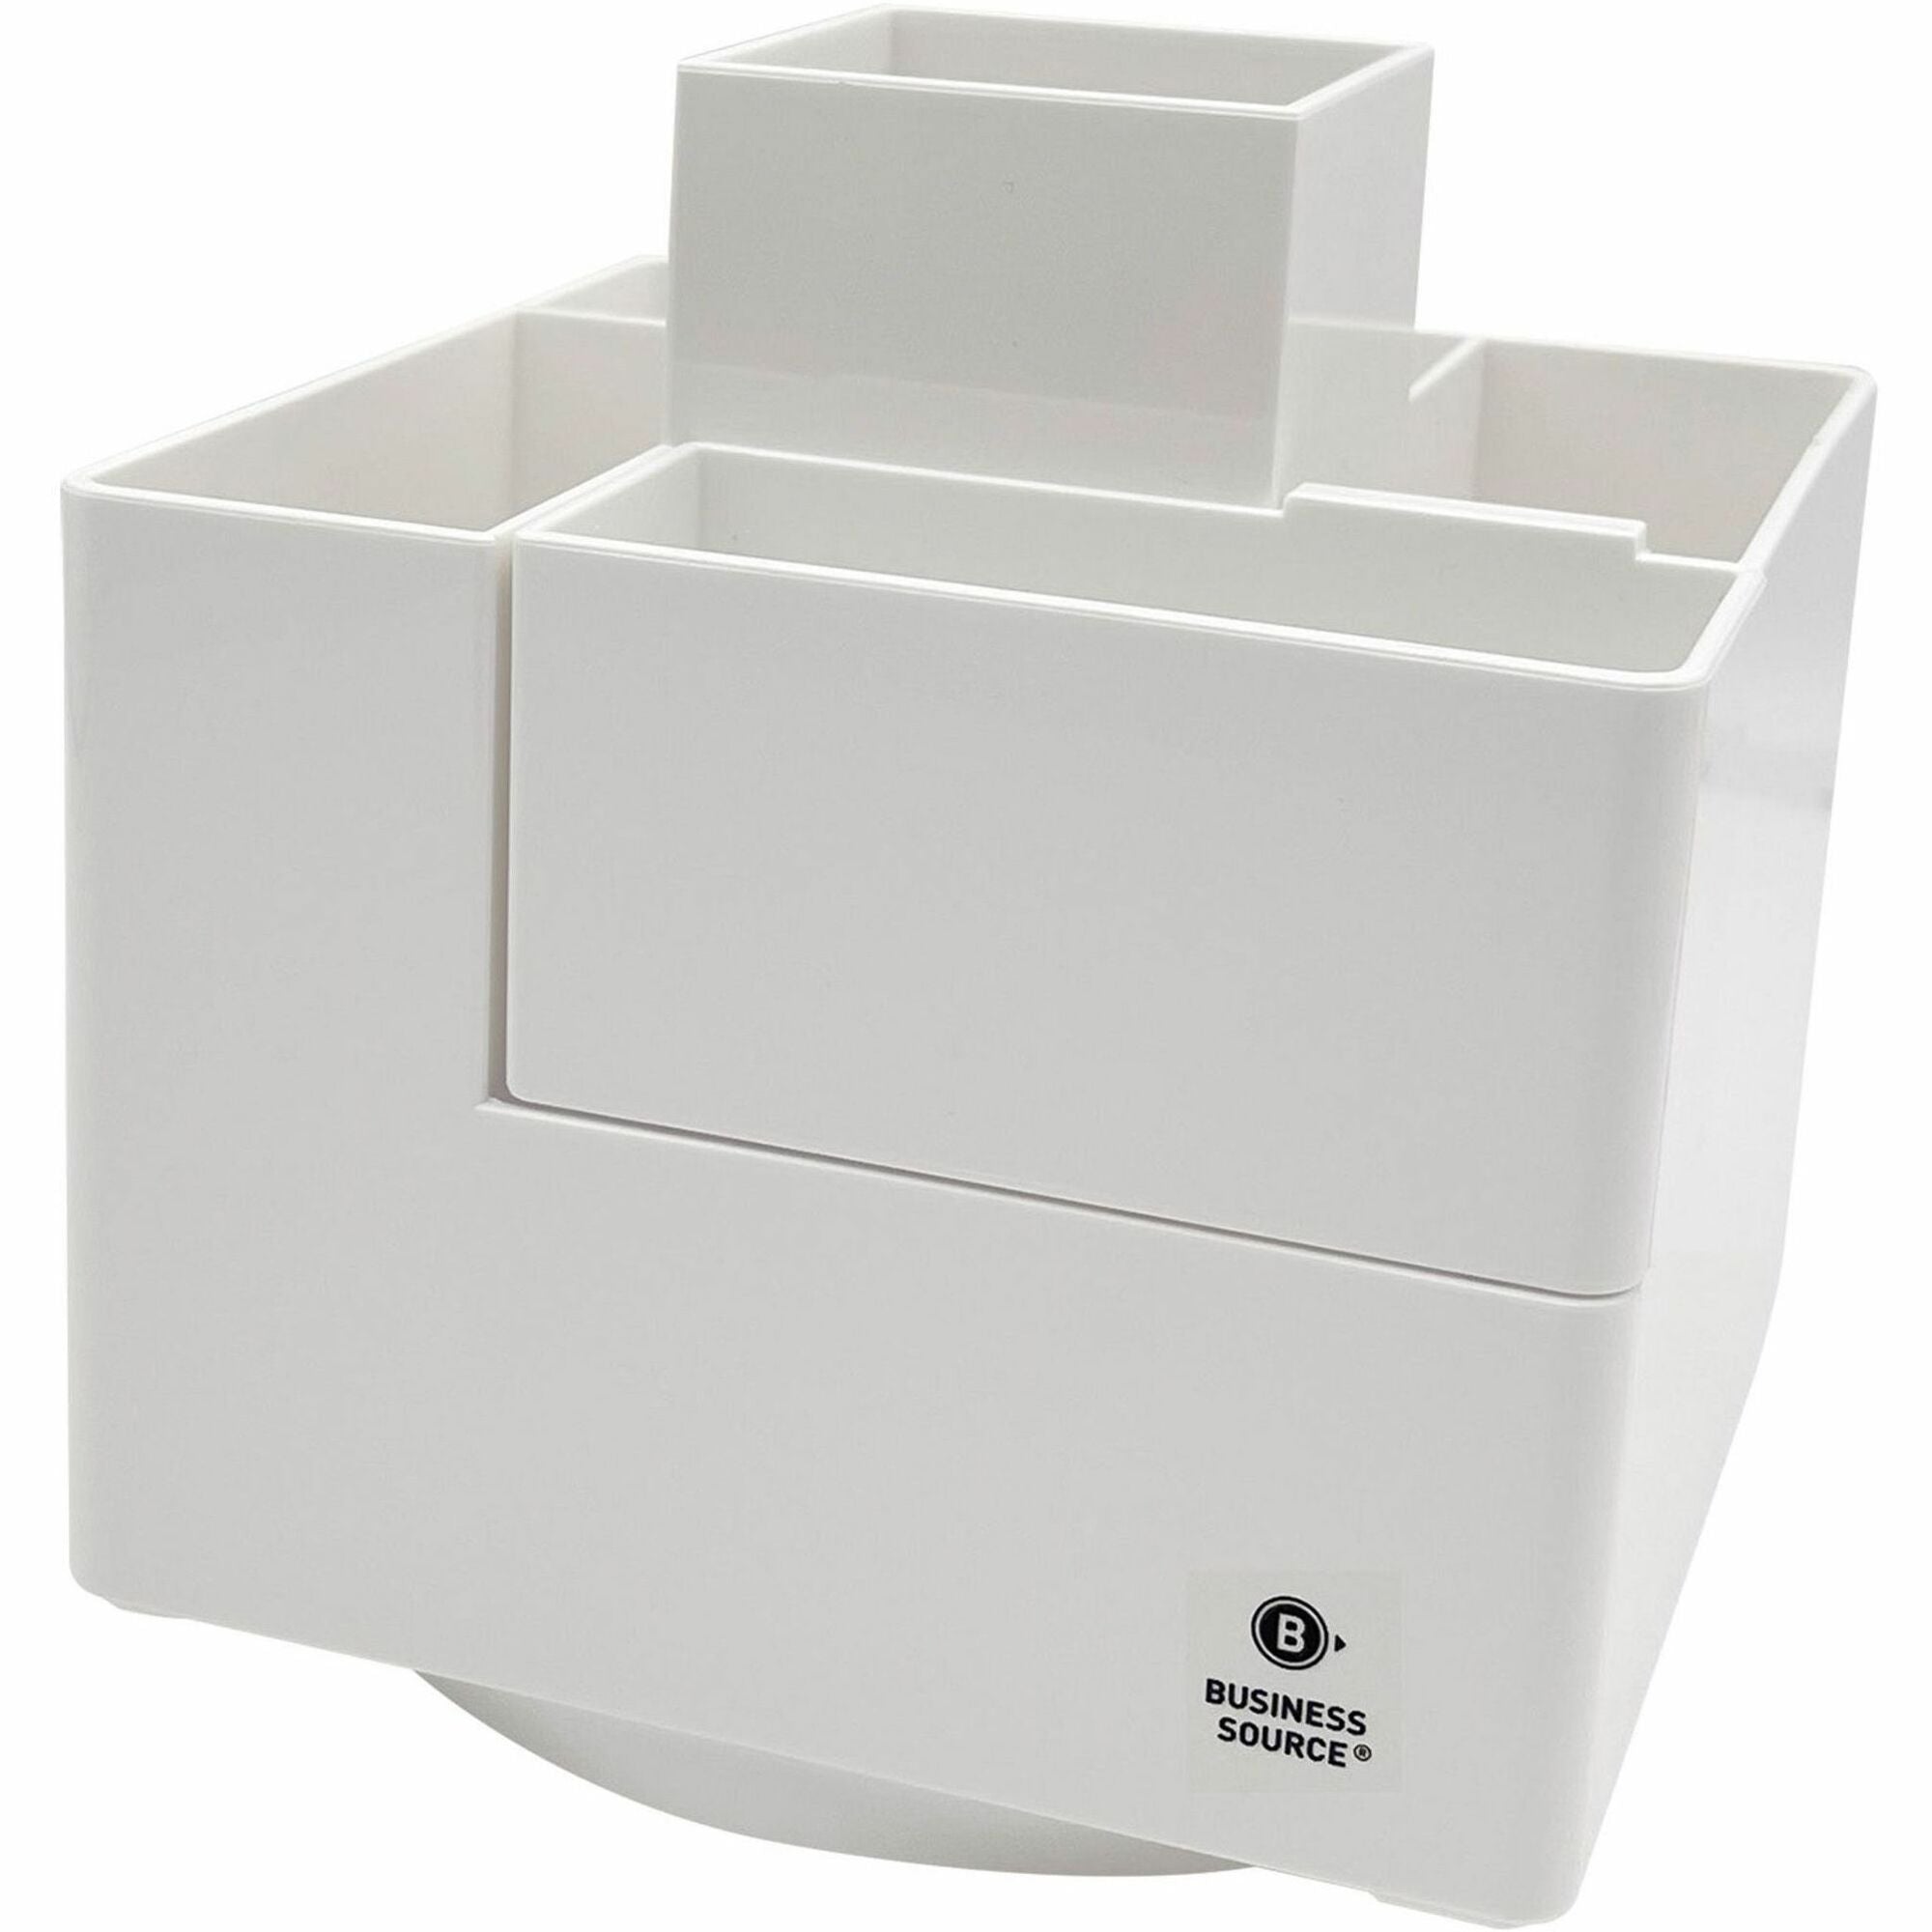 business-source-modular-rotatable-pen-cup-6-compartments-51-height-x-47-width-x-47-depth-modular-sturdy-durable-white-polyethylene-terephthalate-pet-1-each_bsn11878 - 1